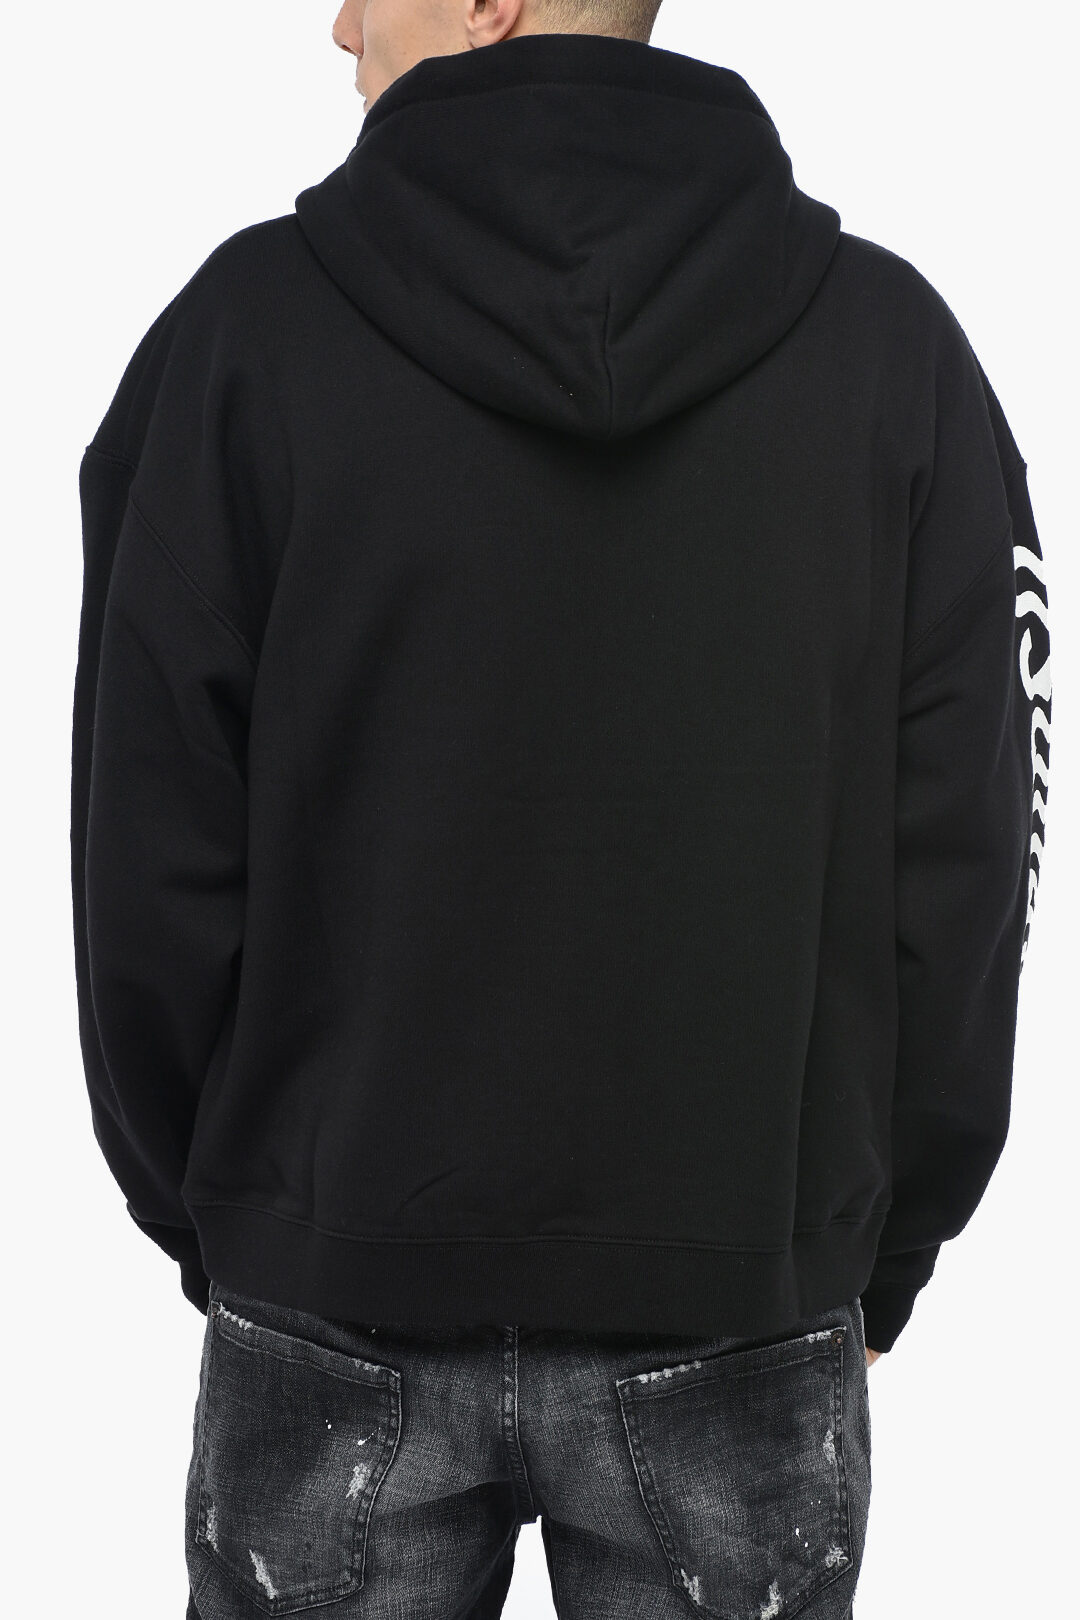 Dsquared2 HERCA Hoodie Sweatshirt with Zipped Closure men - Glamood Outlet